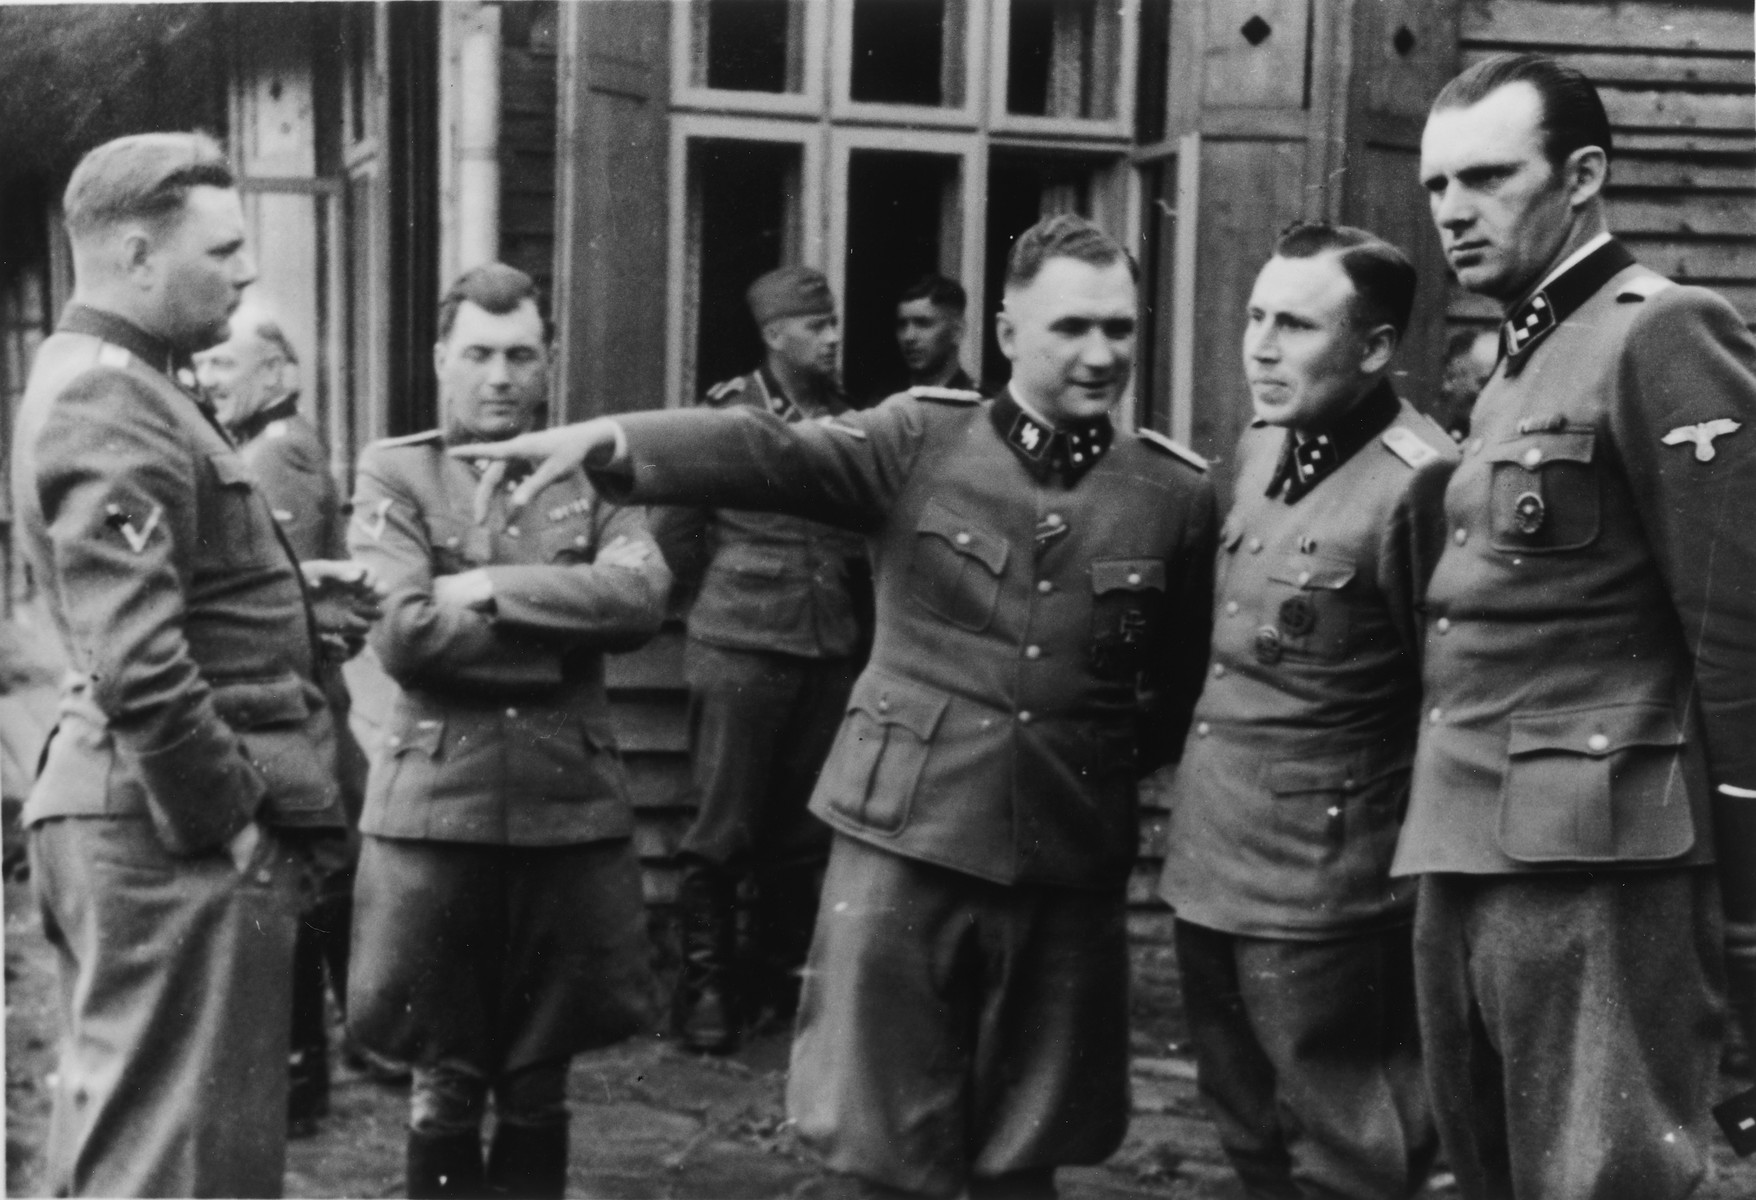 A group of SS officers gathers at Solahuette, the SS retreat outside of Auschwitz.

From left to right are Josef Kramer, Dr. Josef Mengele, Richard Baer, Karl Hoecker and Walter Schmidetzki. 

[Based on the officers visiting Solahutte, we surmise that the photographs were taken to honor Rudolf Hoess who completed his tenure as garrison senior on July 29.]